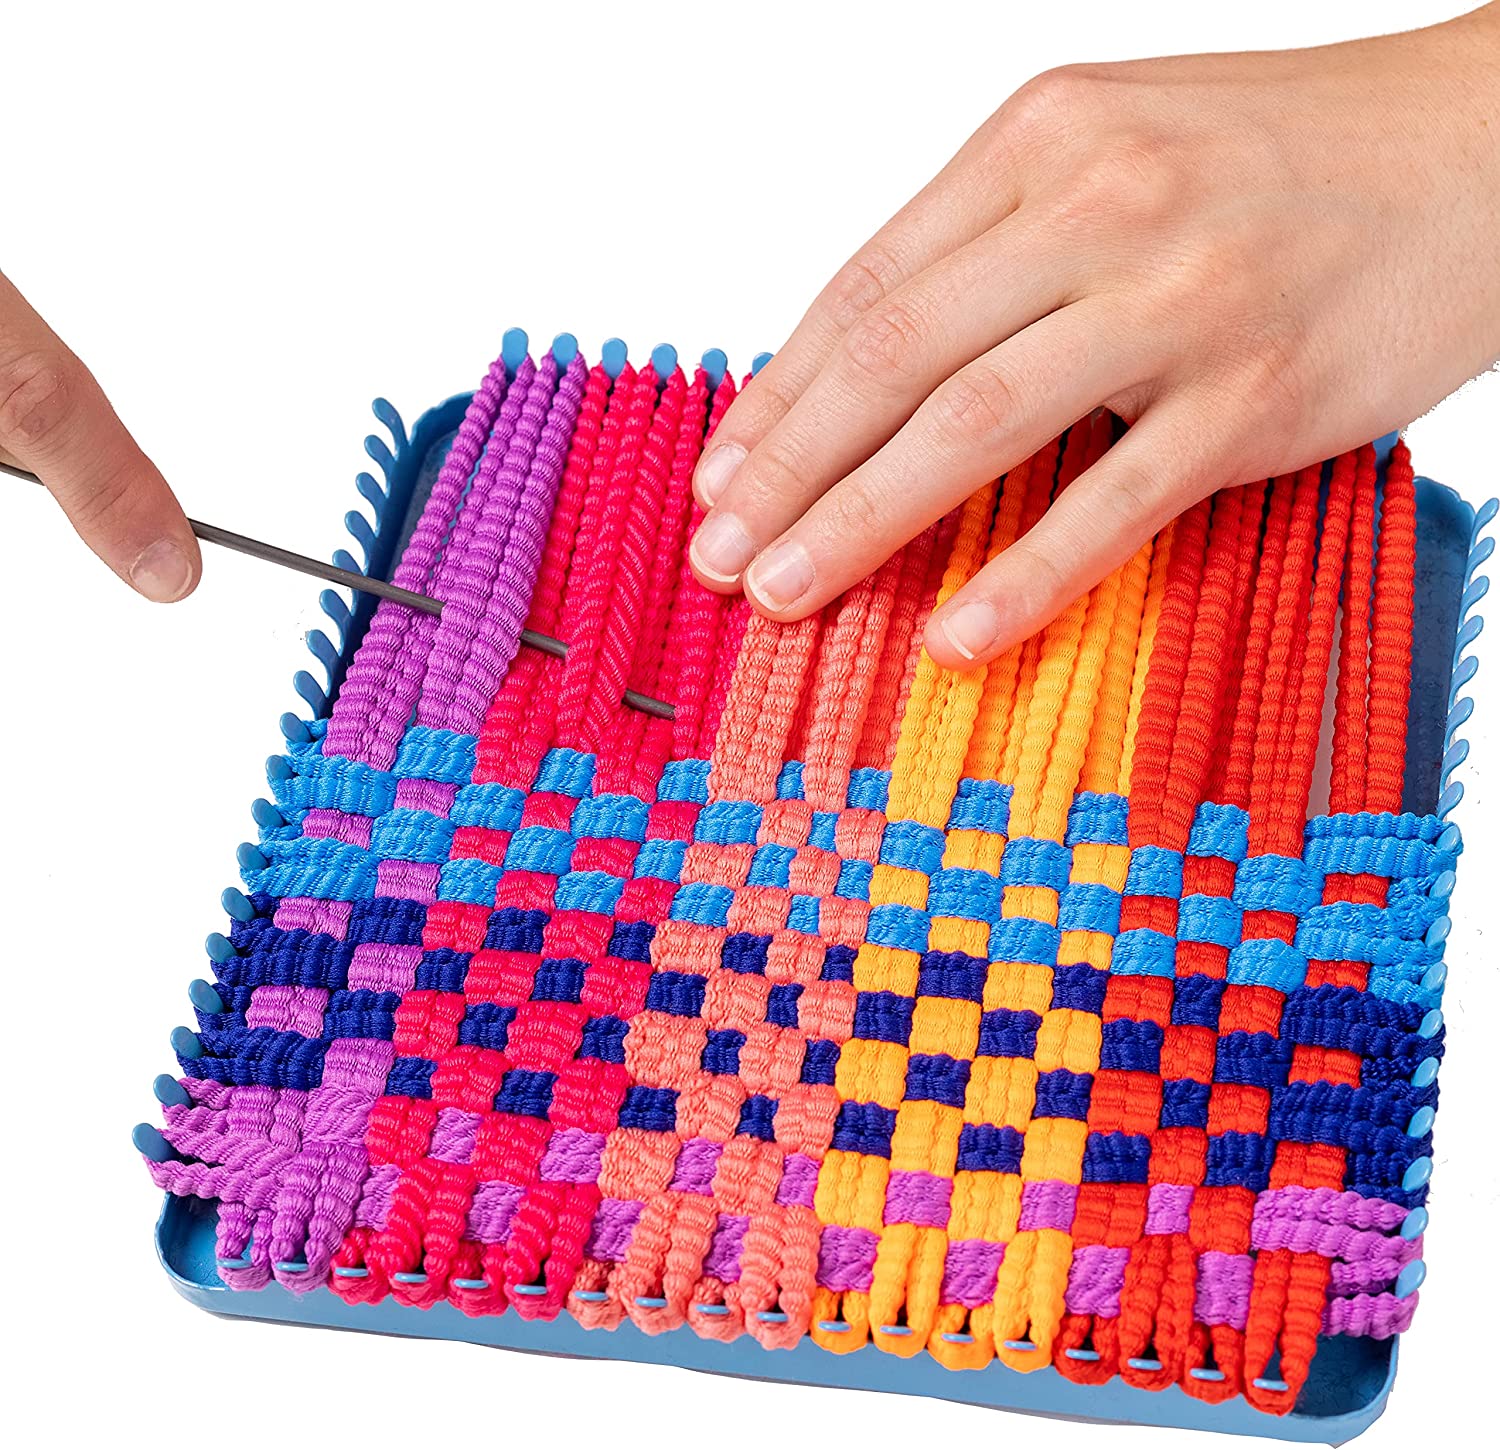 Hapinest Make Your Own Potholders Weaving Loom Kit Arts and Crafts